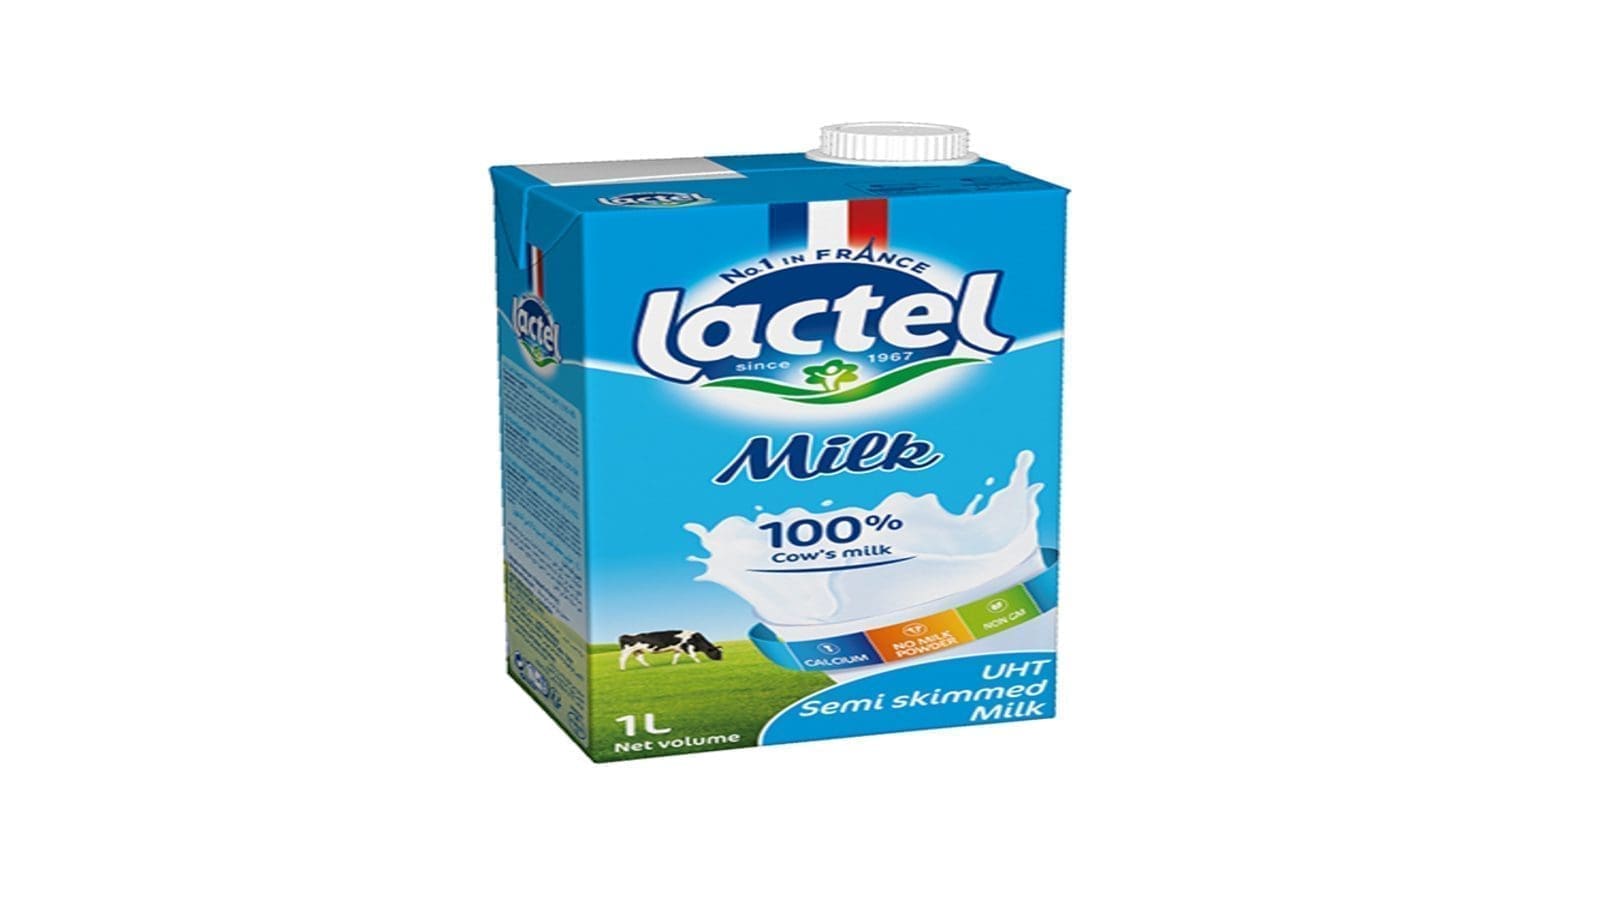 Lactis launches fortified milk brand in India to respond to nutrition focus by consumers during Covid-19